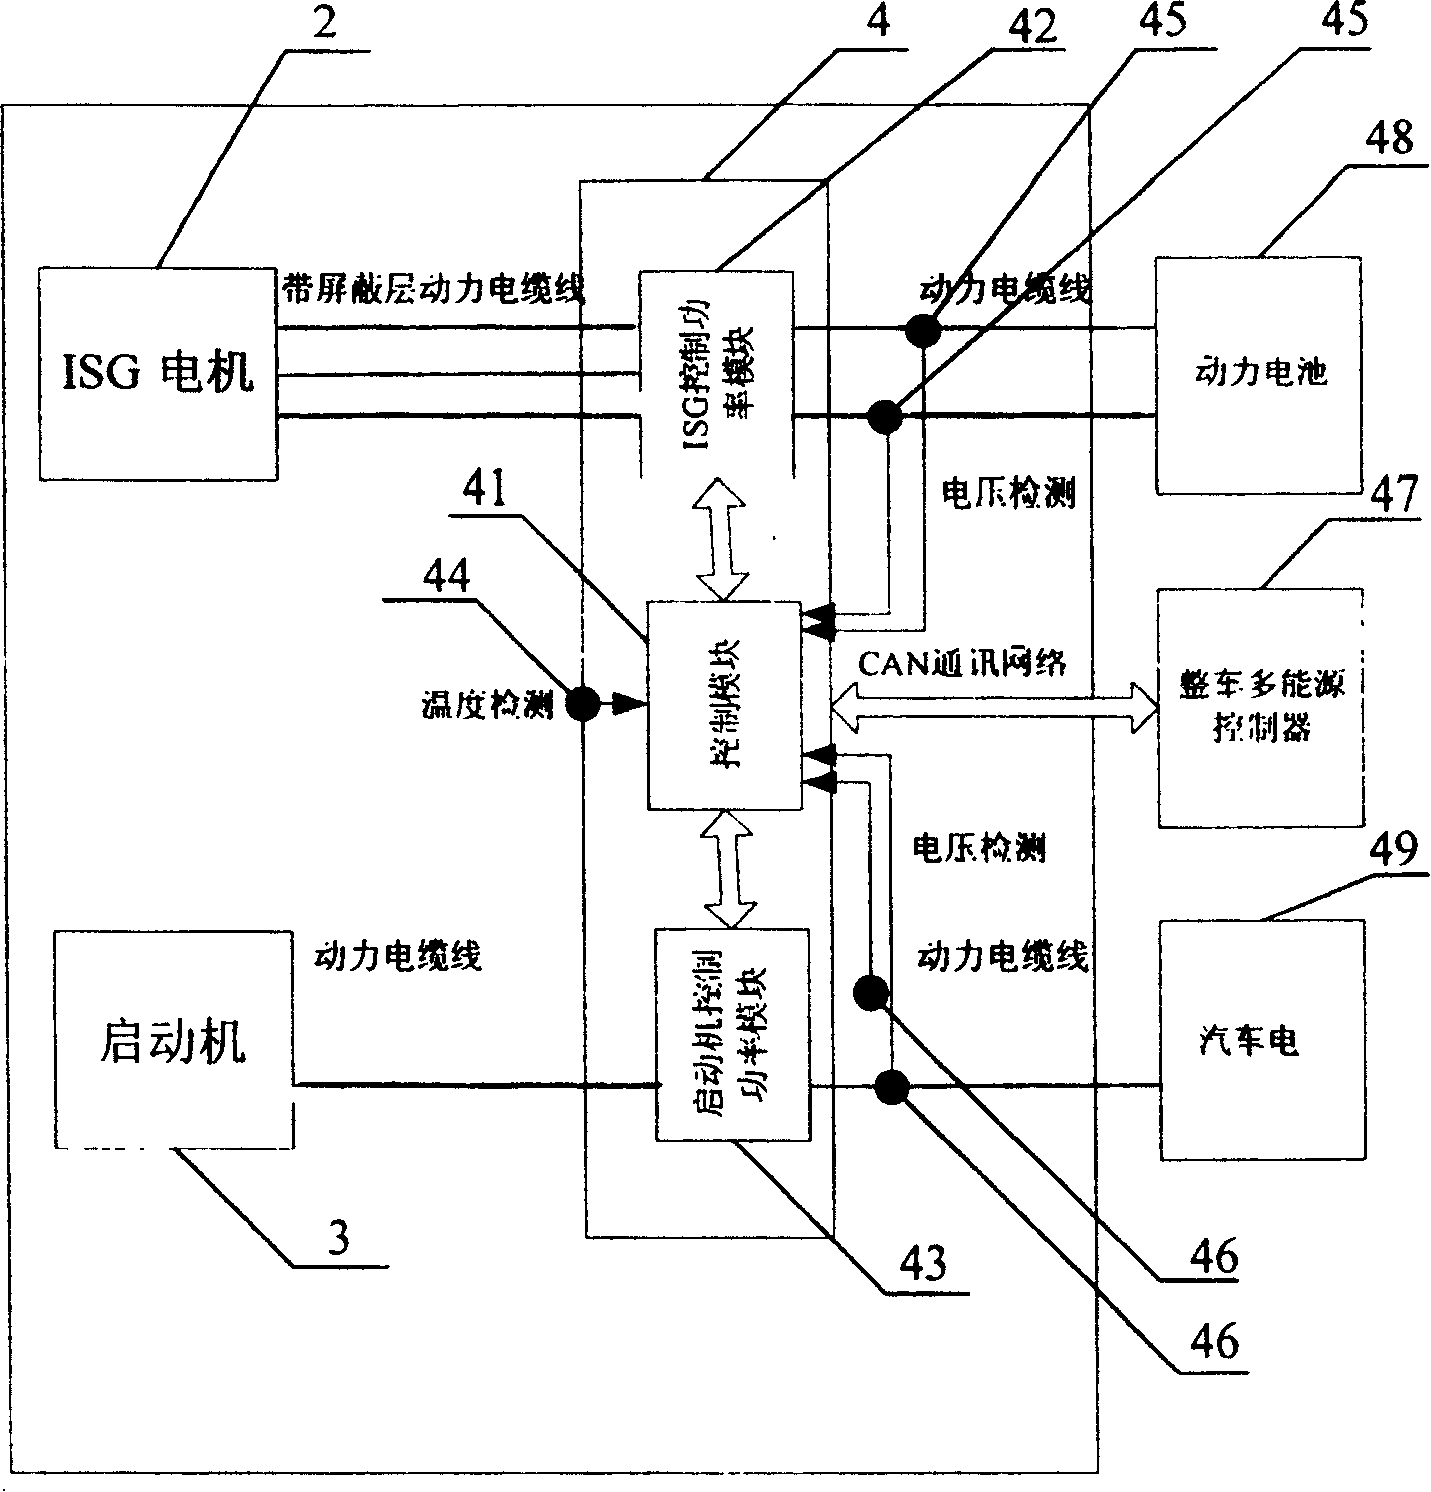 Integrated starter/generator hybrid power system and controlling method